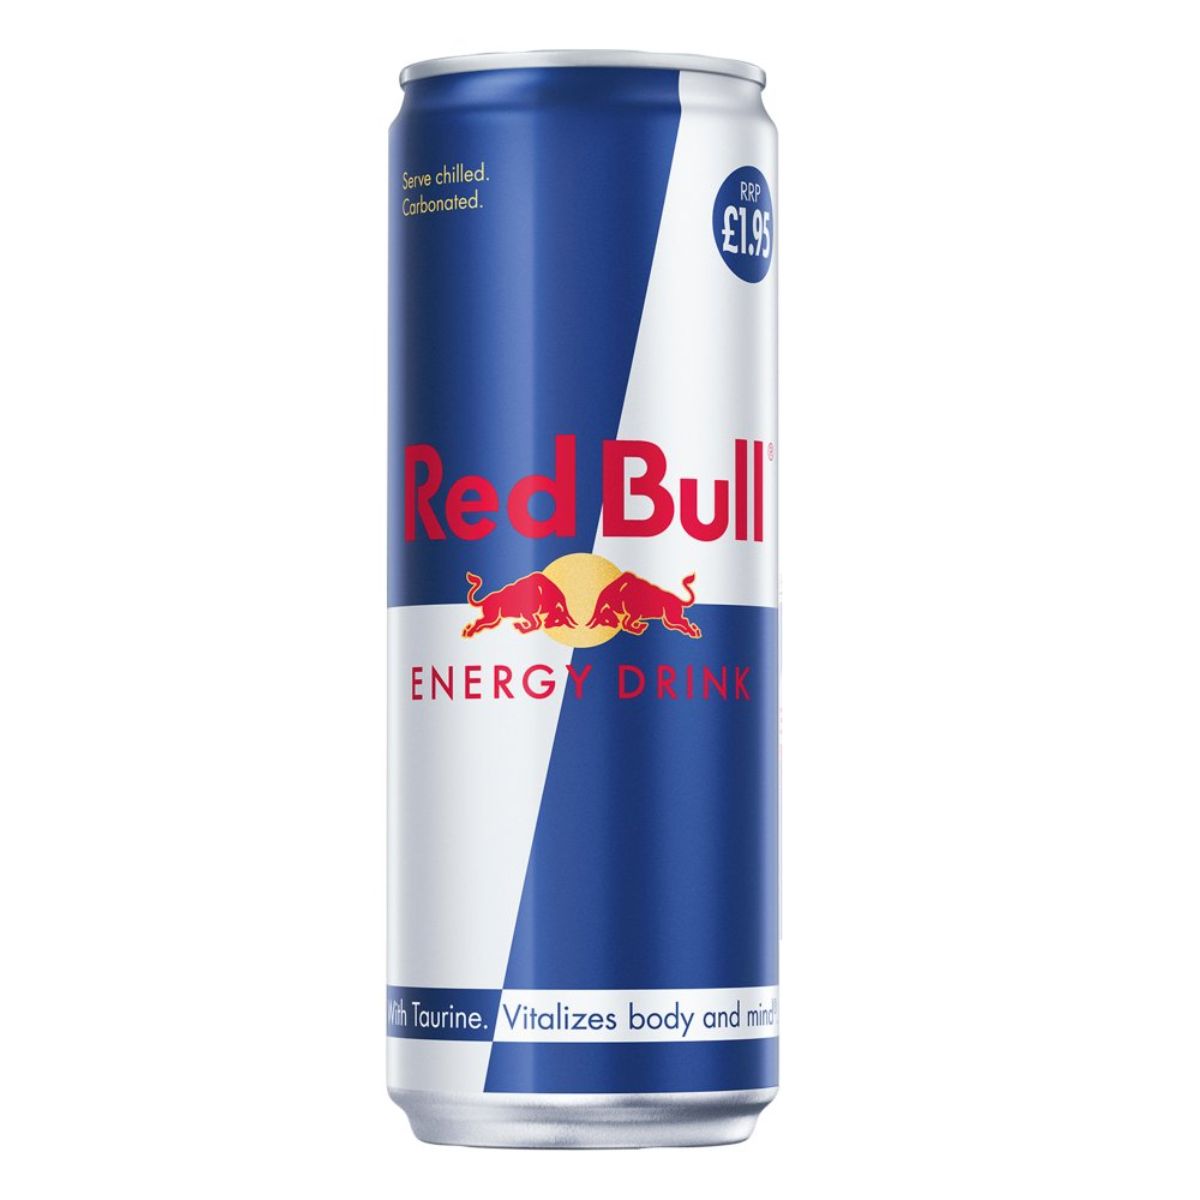 A Red Bull - Energy Drink - 355ml, featuring the logo with two bulls facing each other against a sun backdrop, with the price of £1.95 displayed at the top.